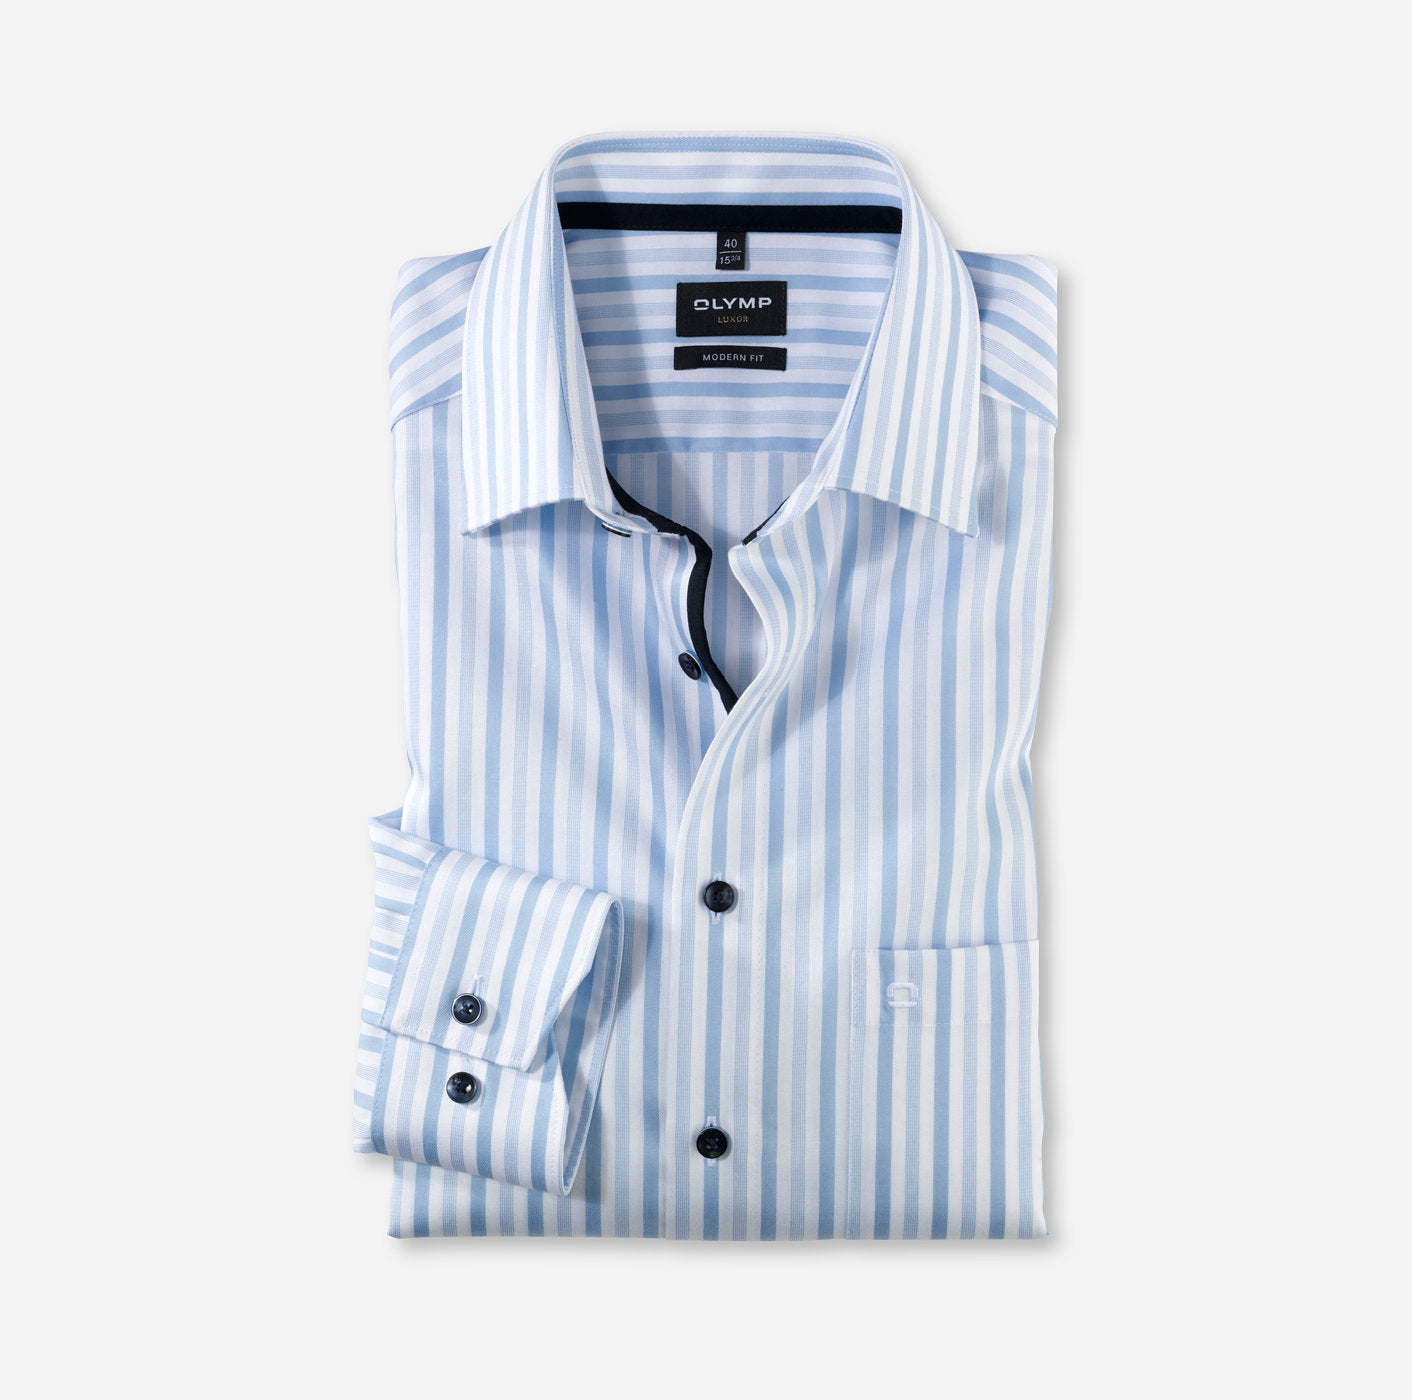 Chemise - Rayures variables - Modern fit - Business